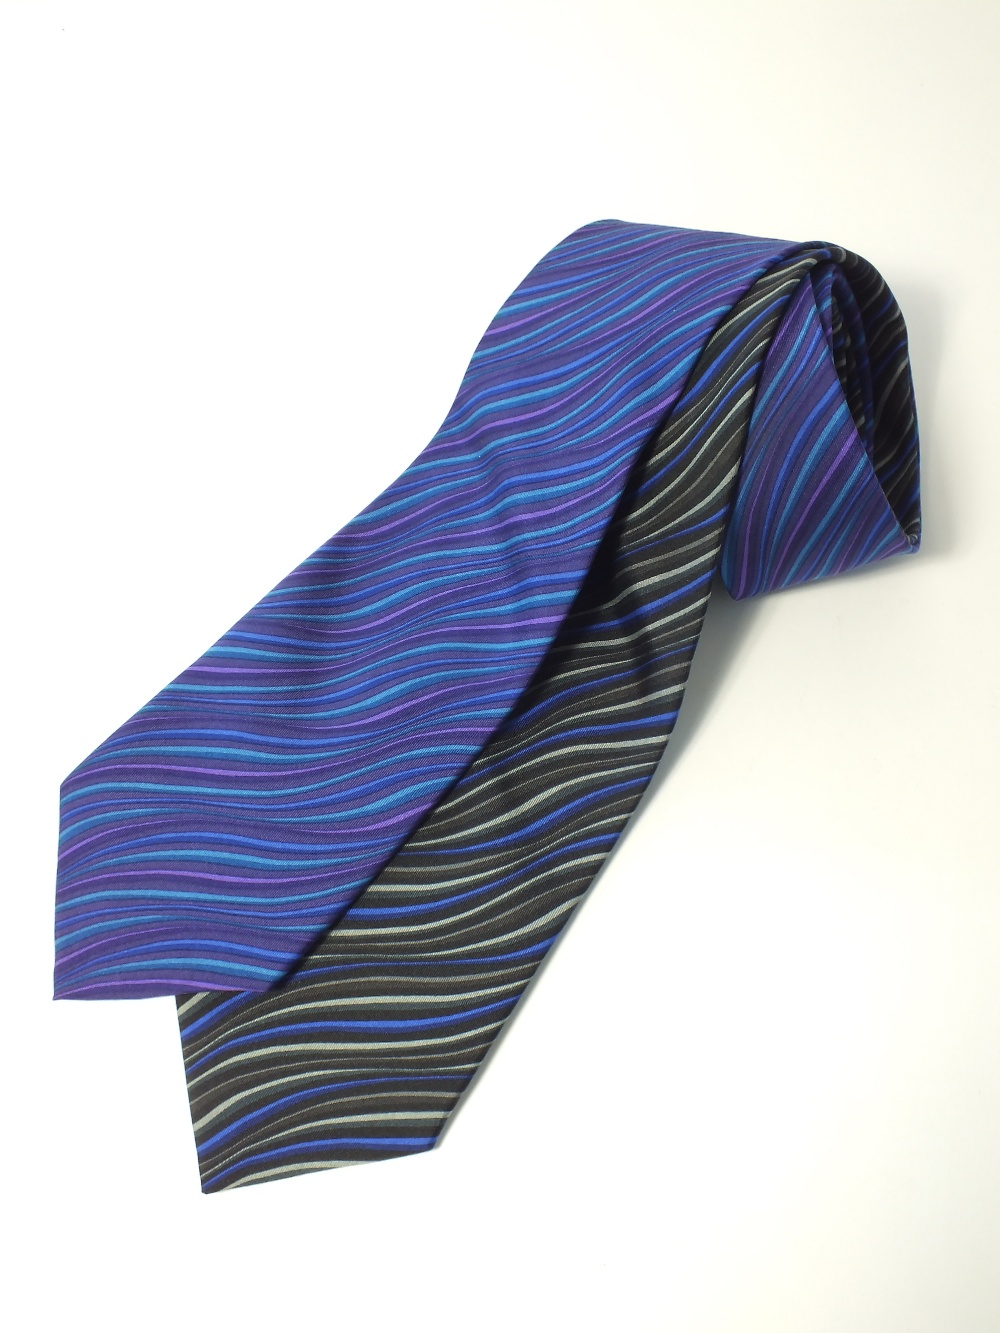 Two Gucci ties, wave pattern, black, grey and blue, blue and purple